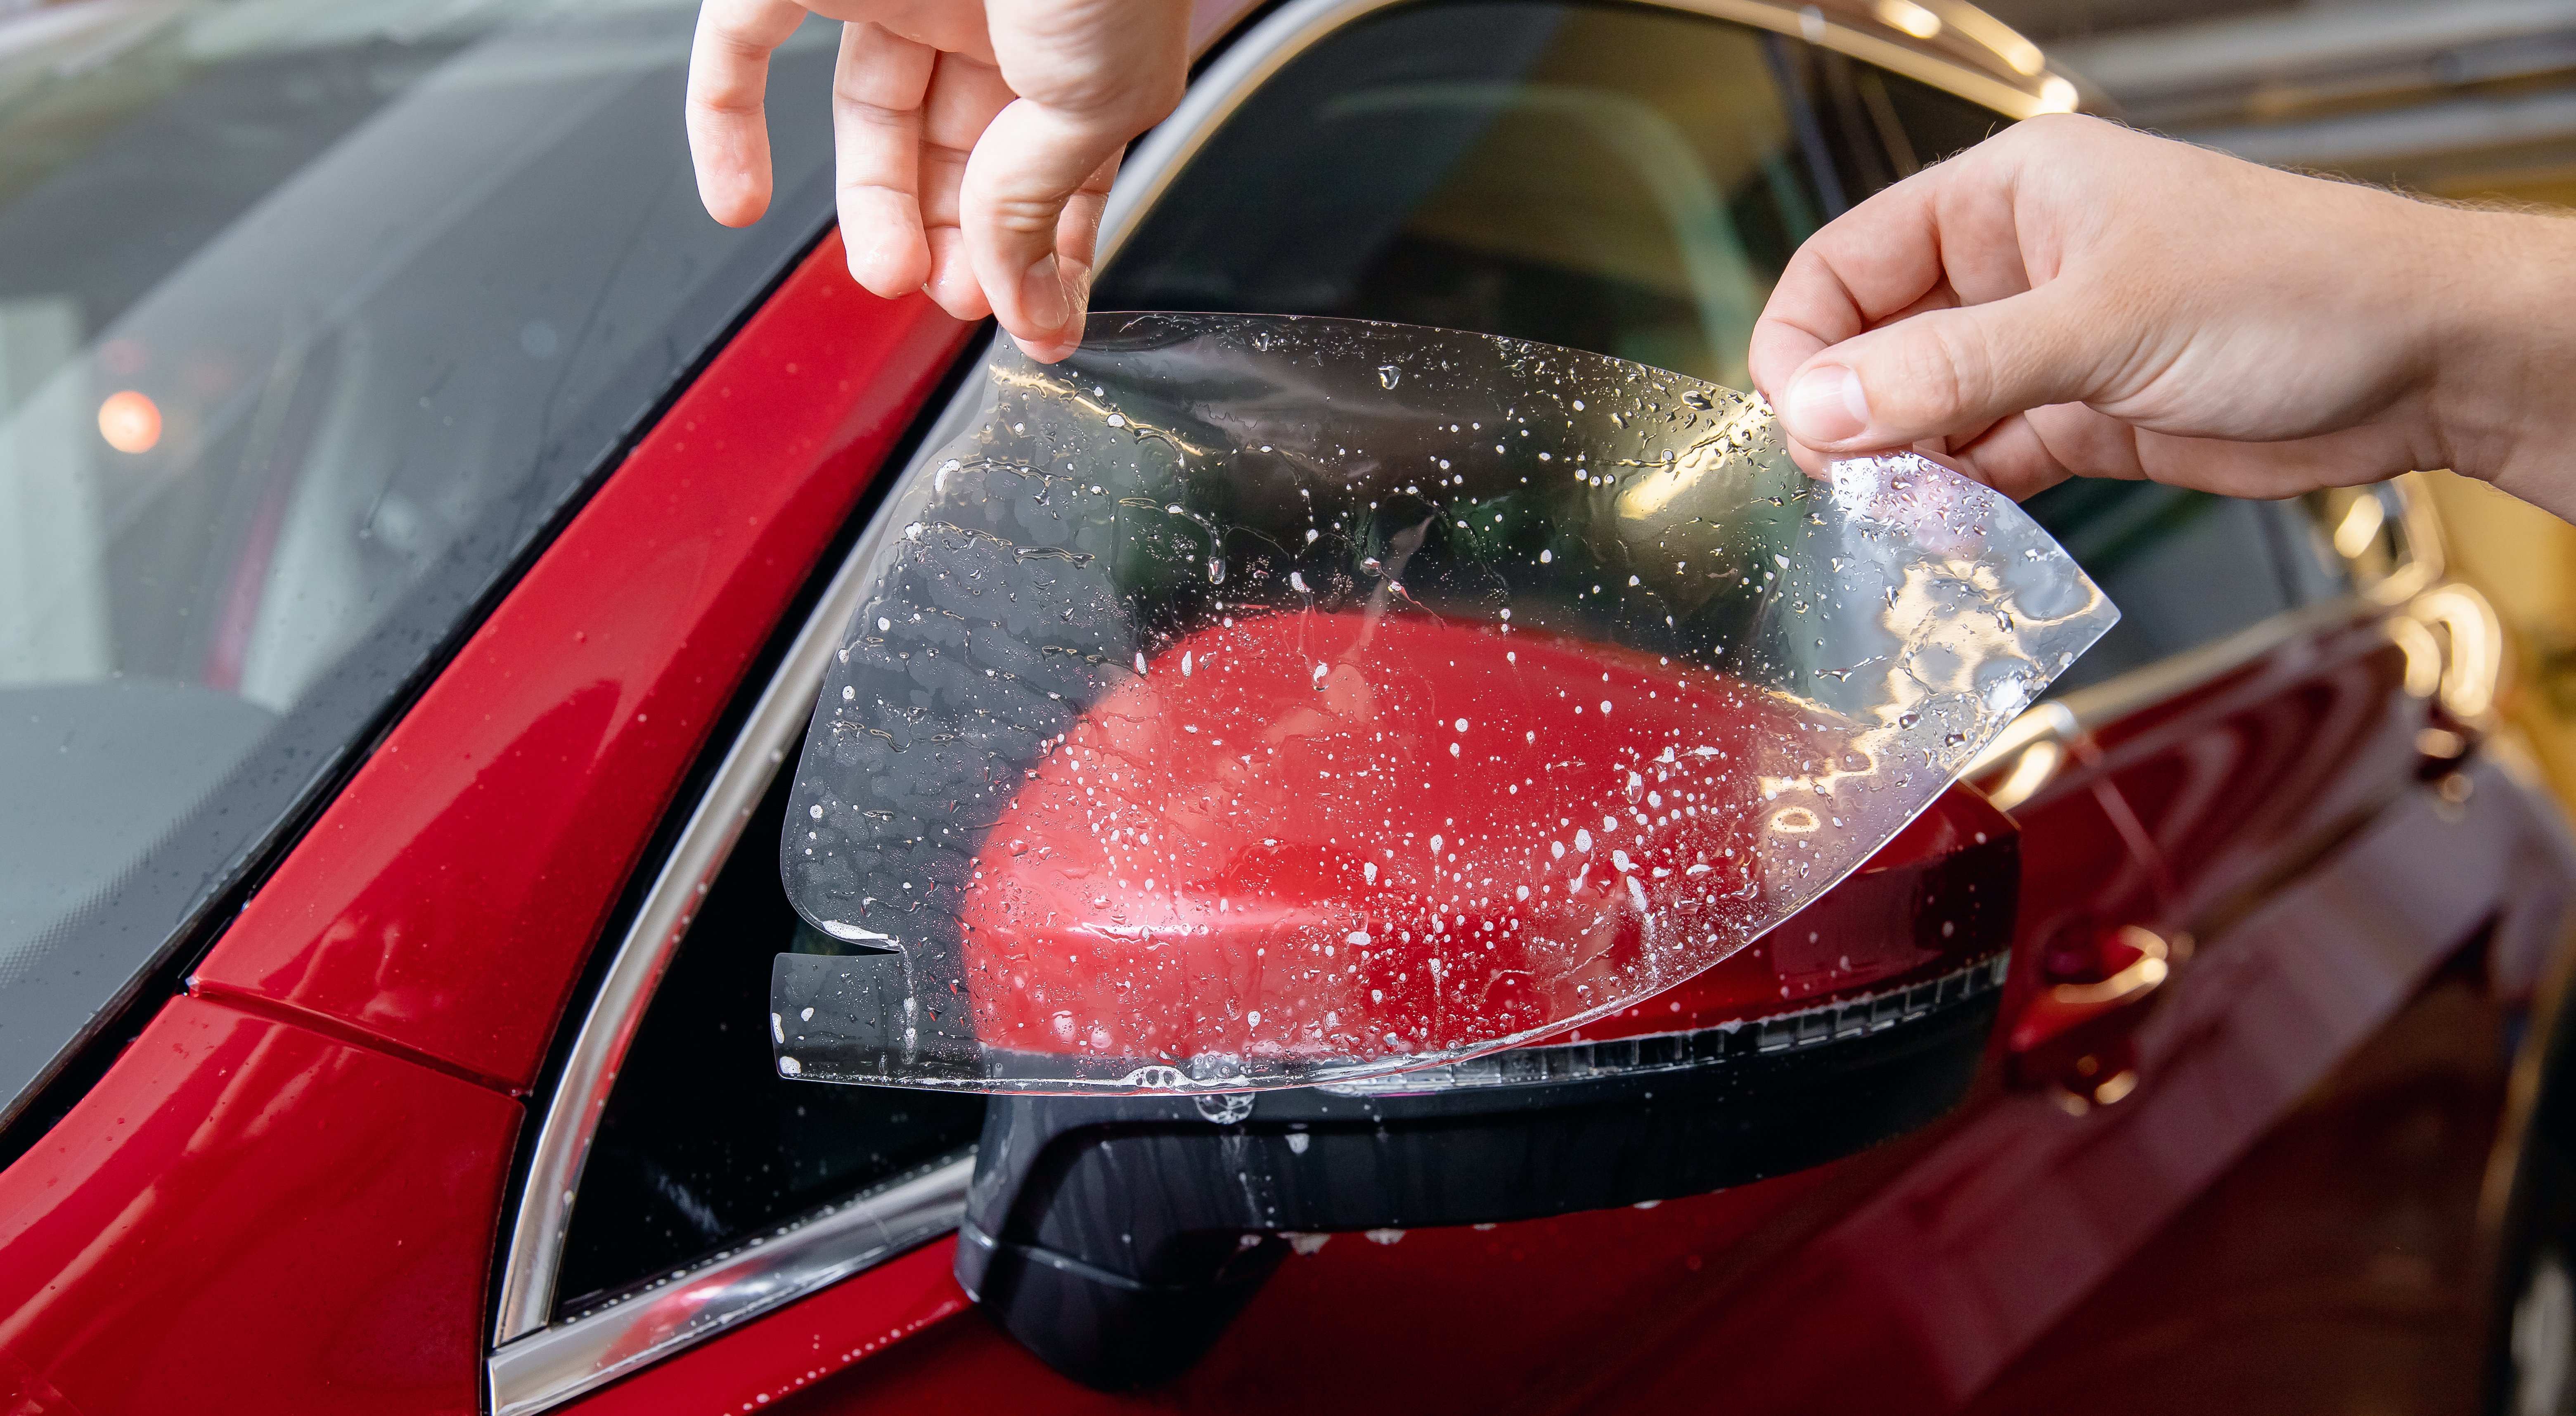 Premium Paint Protection Film (PPF) safeguards your vehicle's paint from road hazards